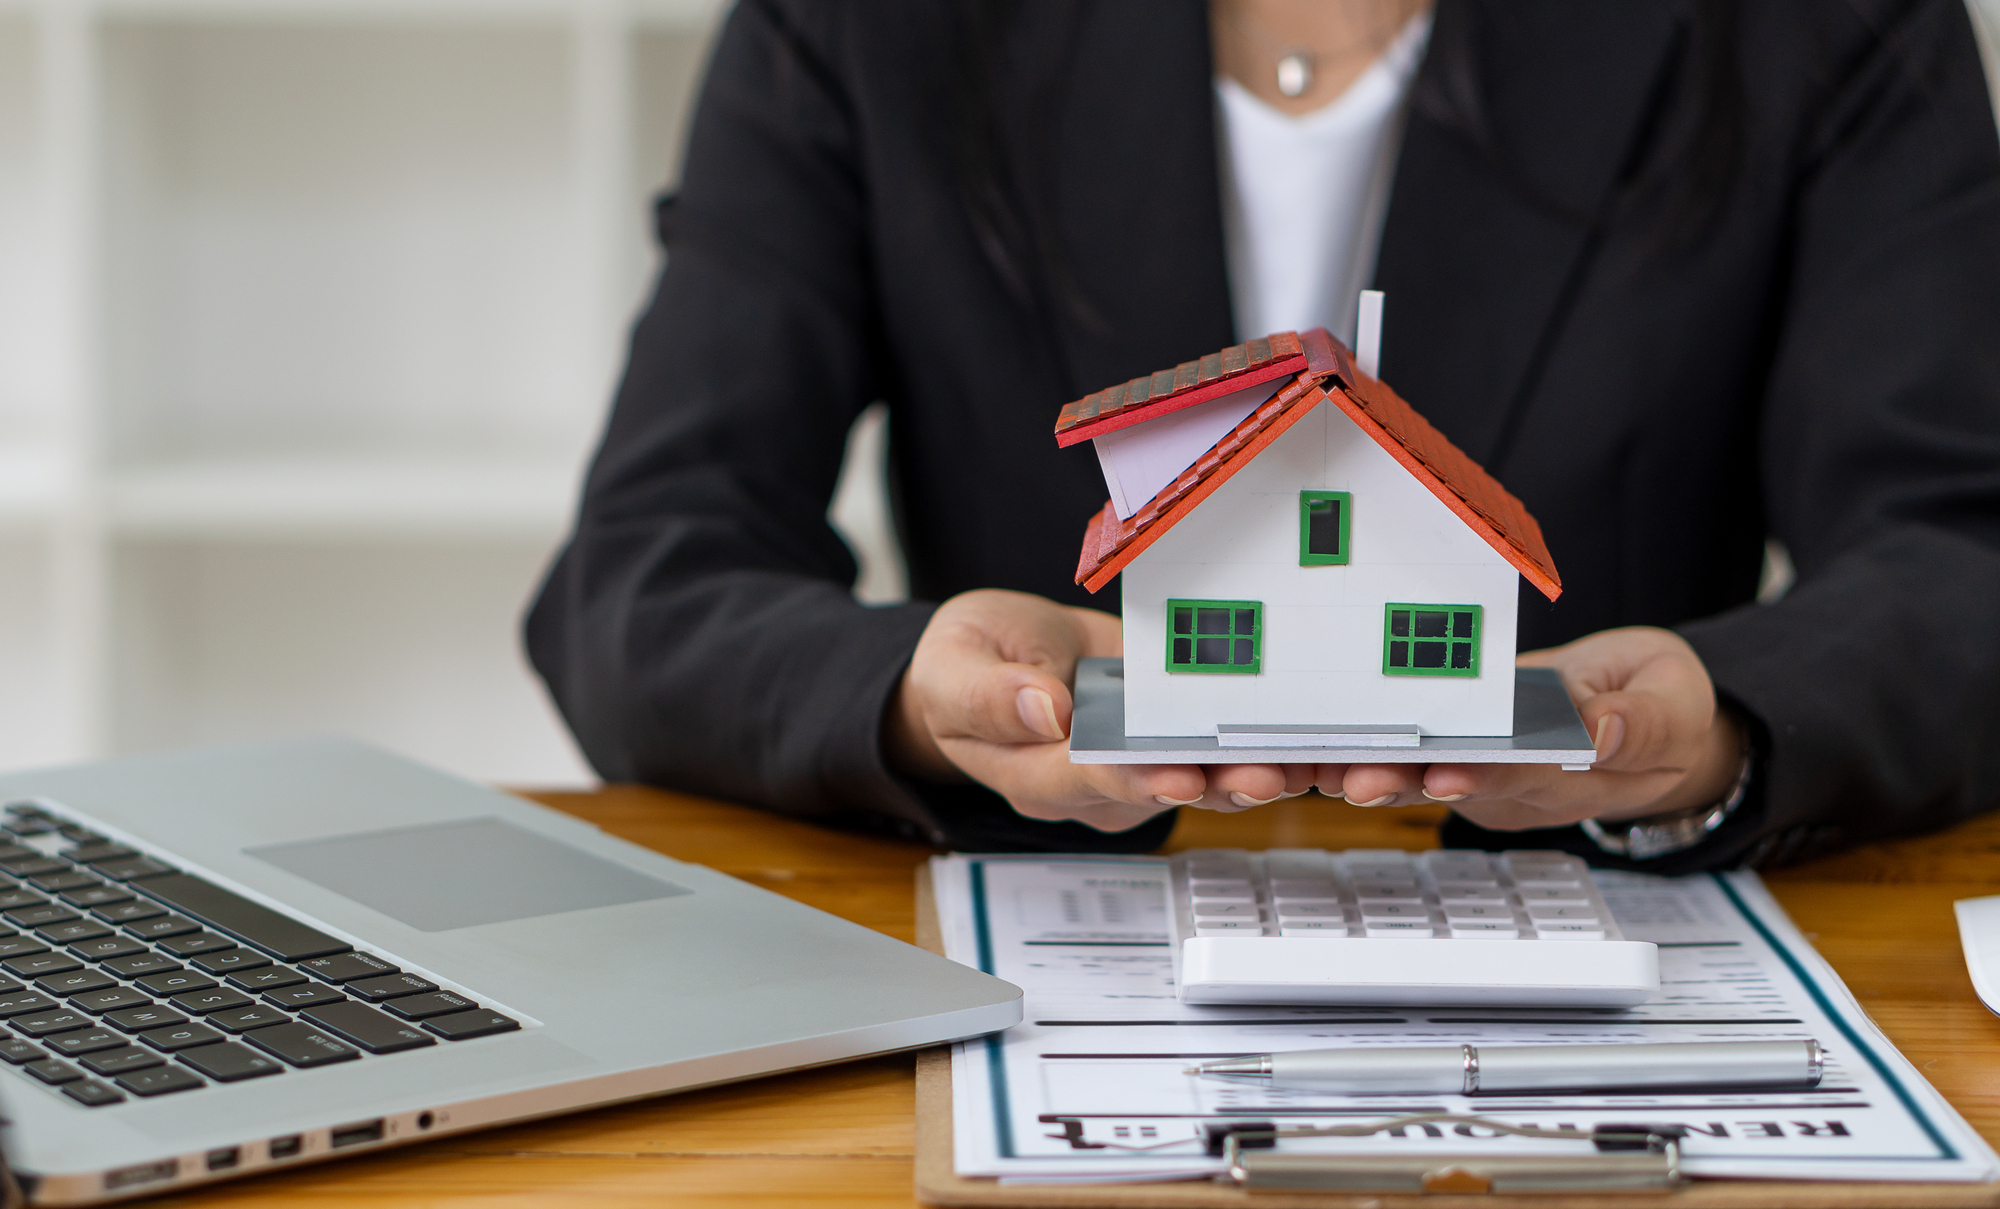 A woman holding a model of a house in front of a laptop.